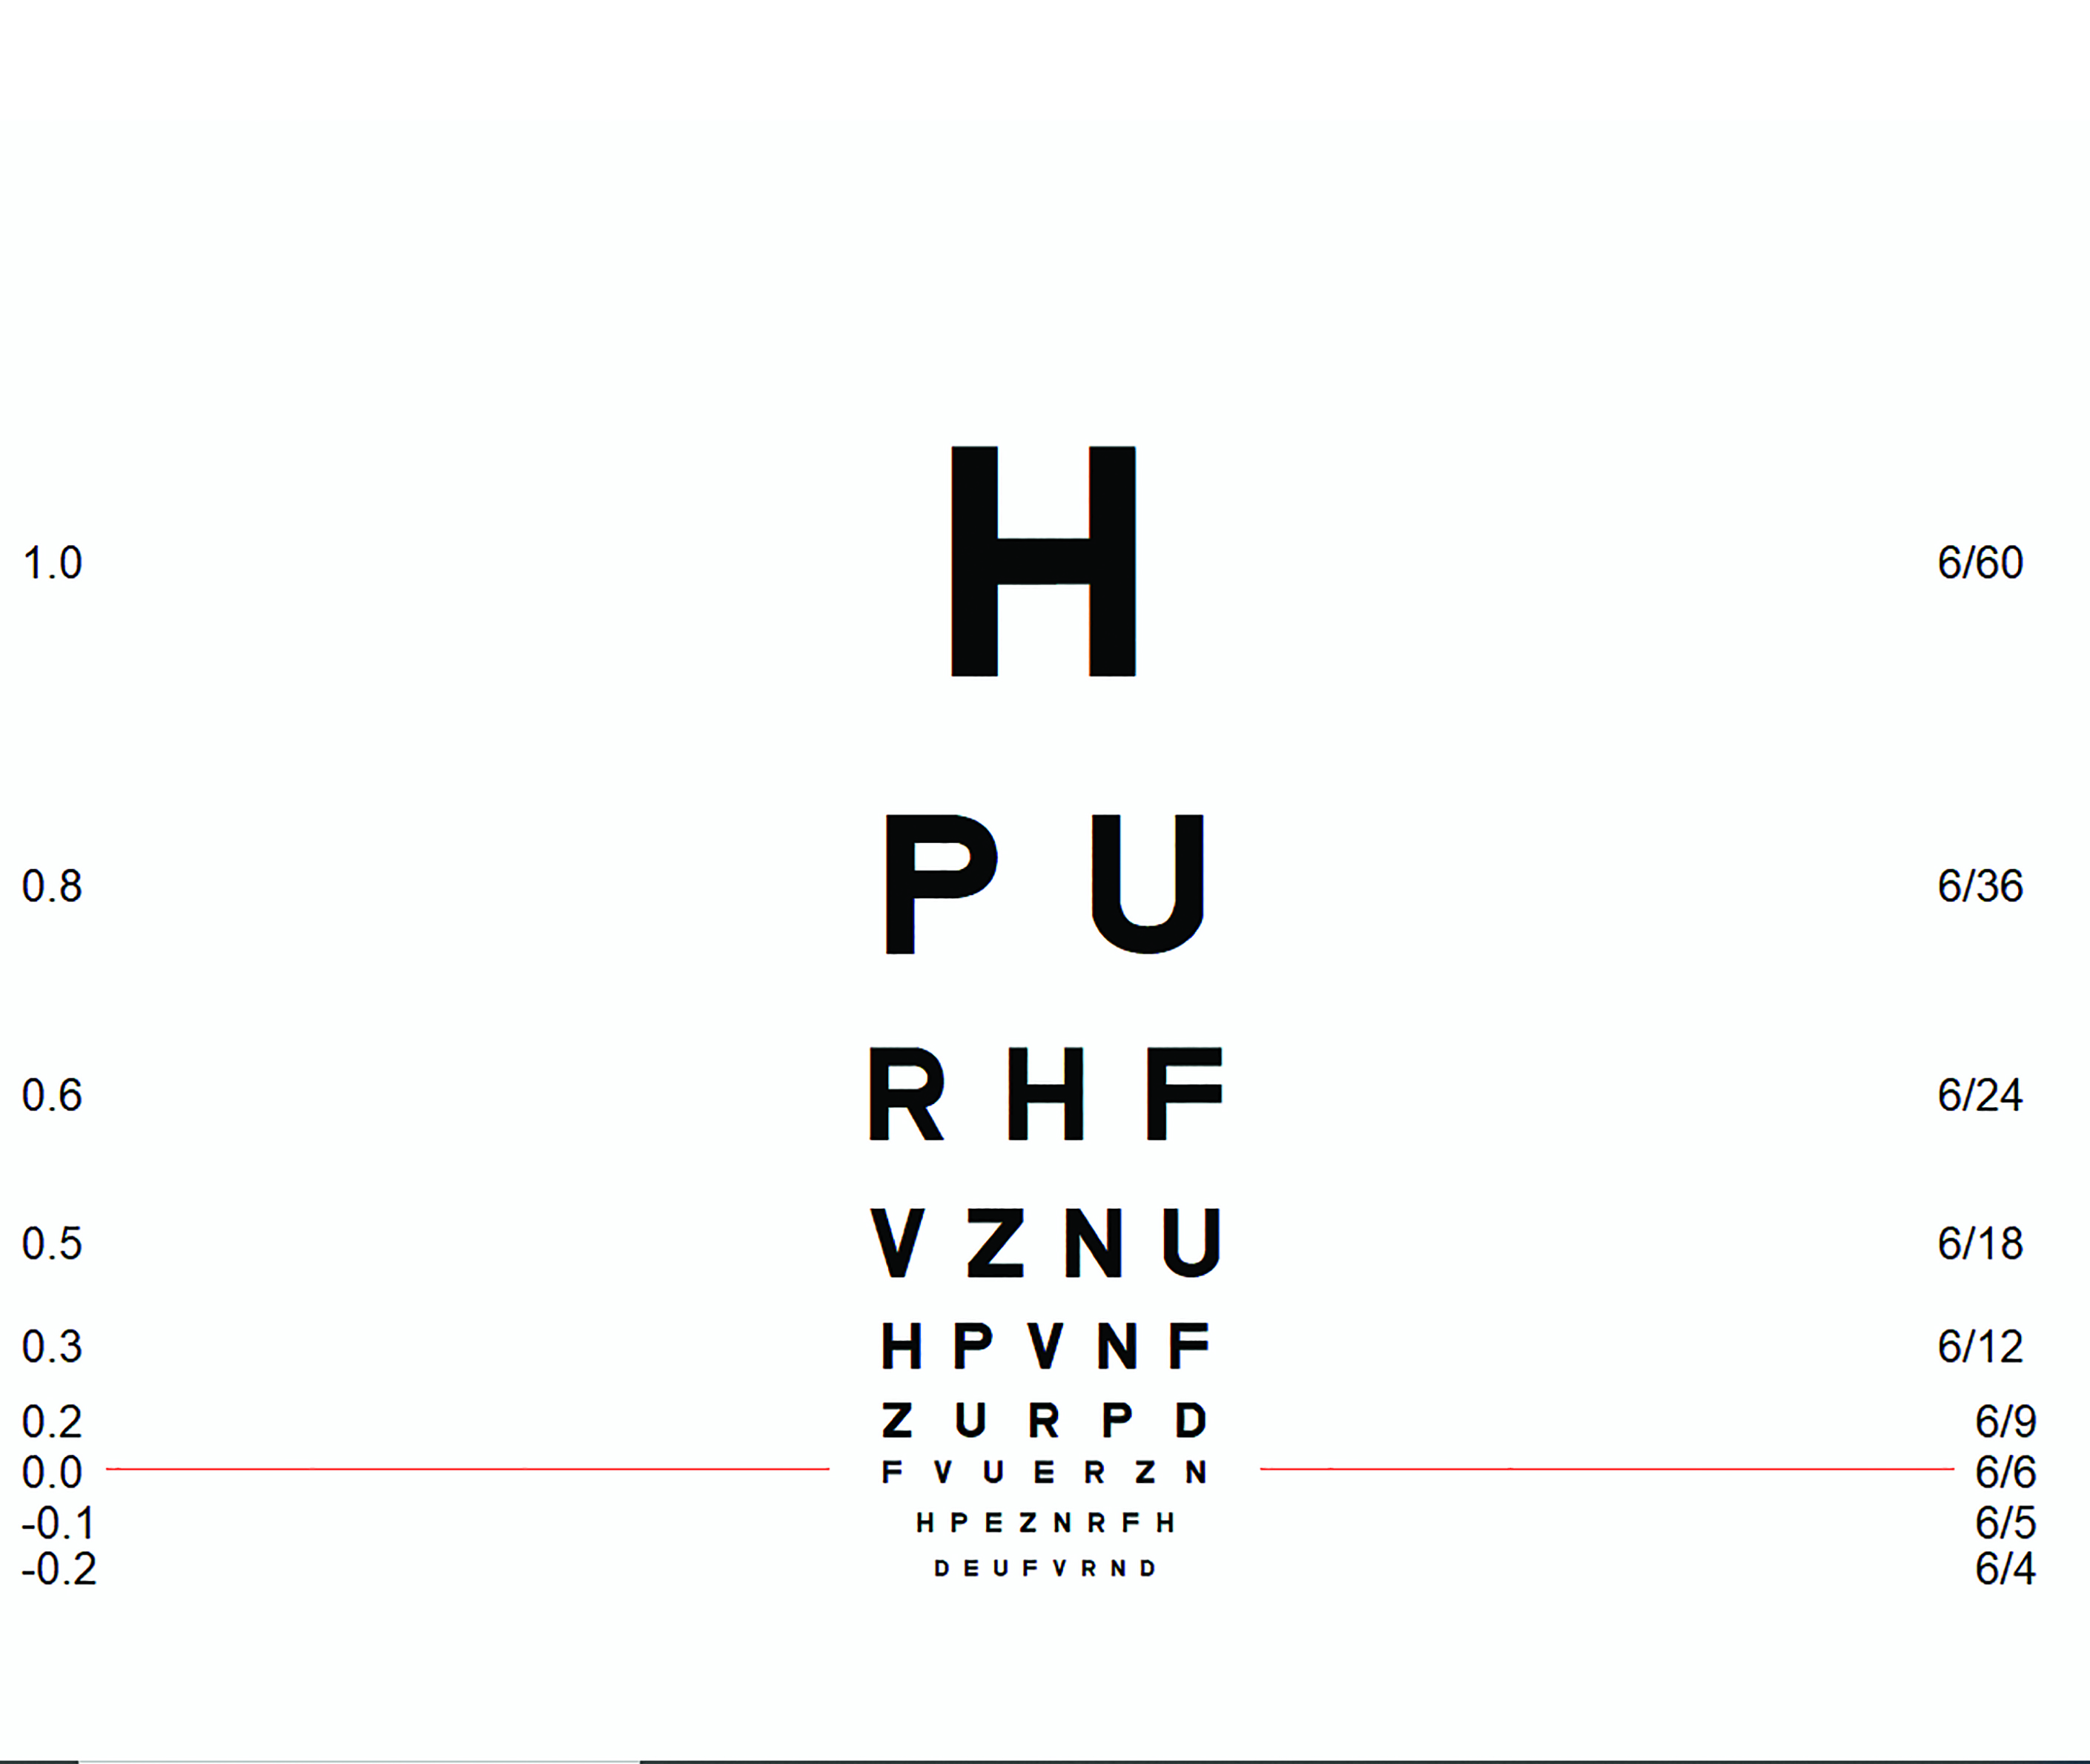 optician-online-cpd-archive